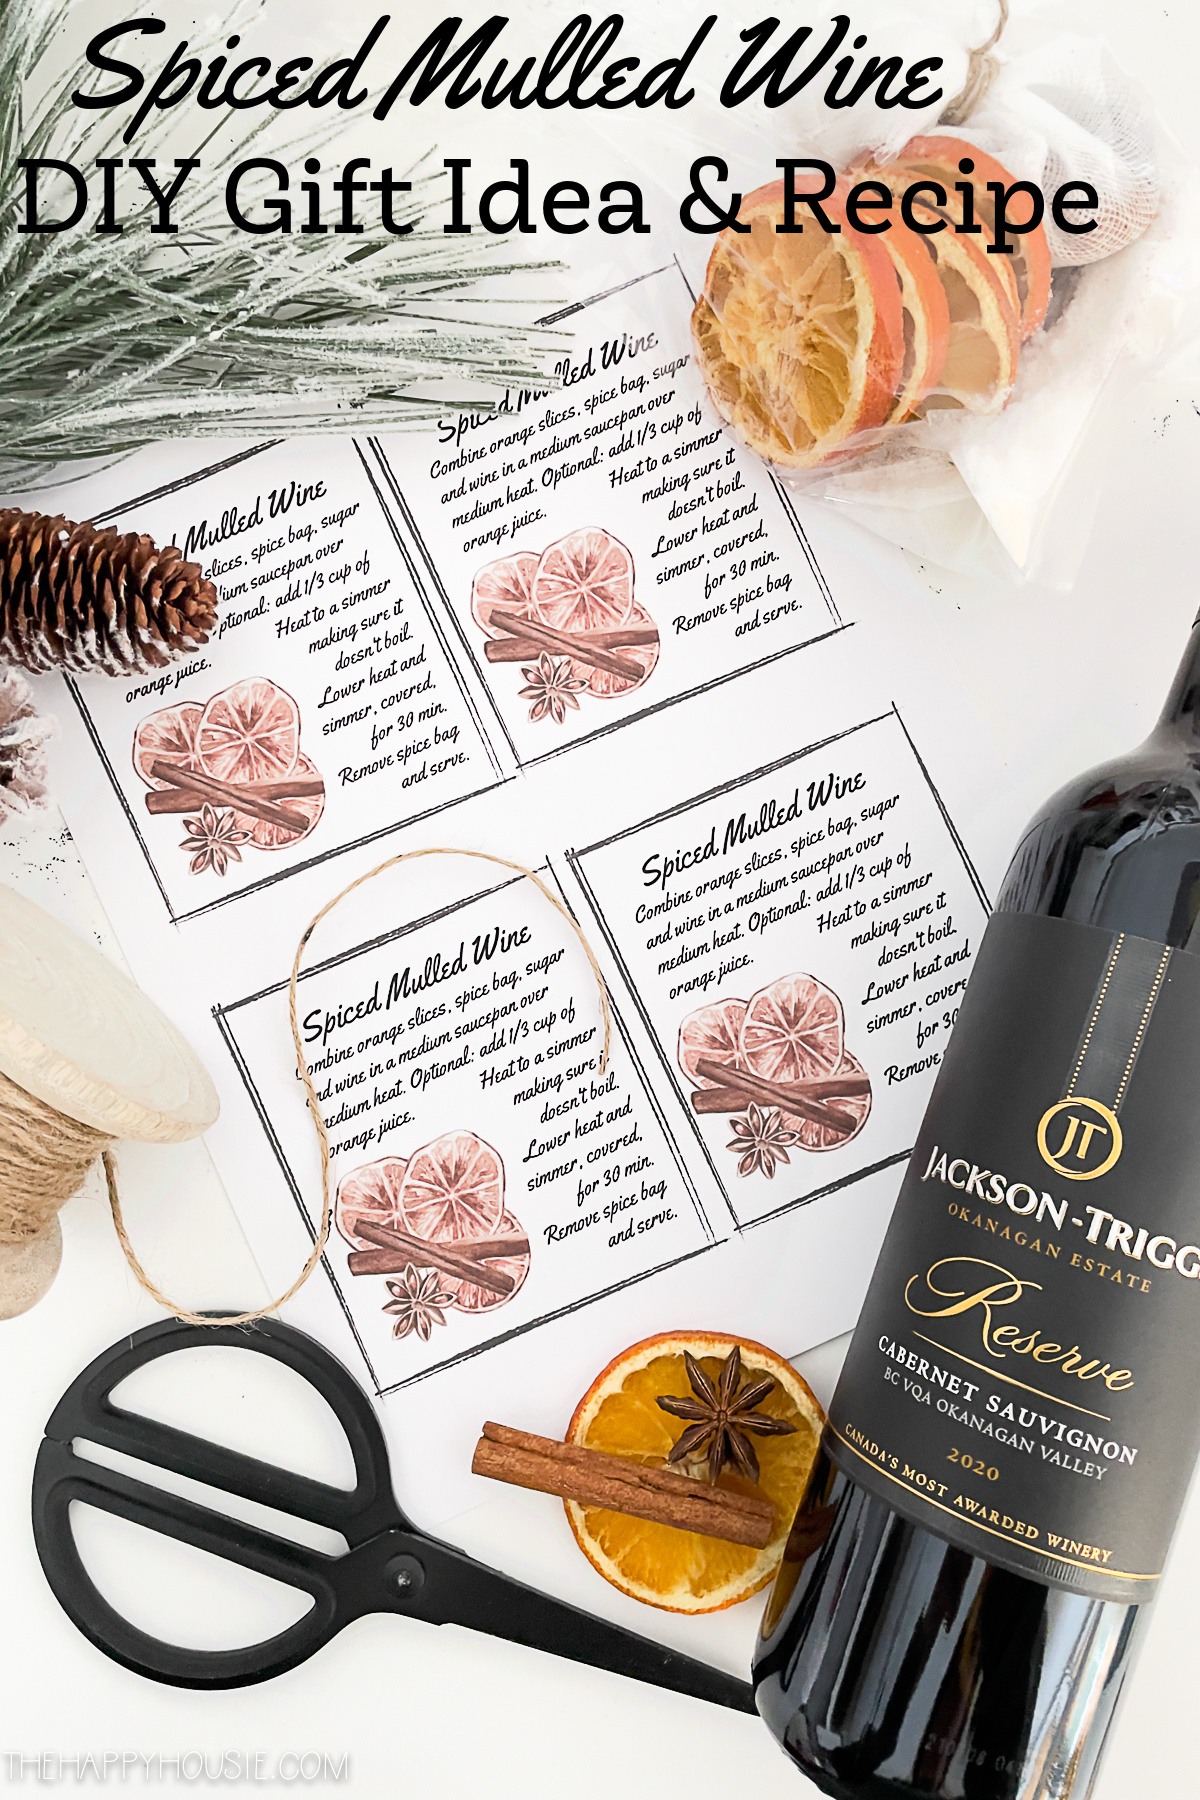 https://www.thehappyhousie.com/wp-content/uploads/2021/12/Spiced-Mulled-Wine-DIY-Gift-Idea-and-Recipe.jpg